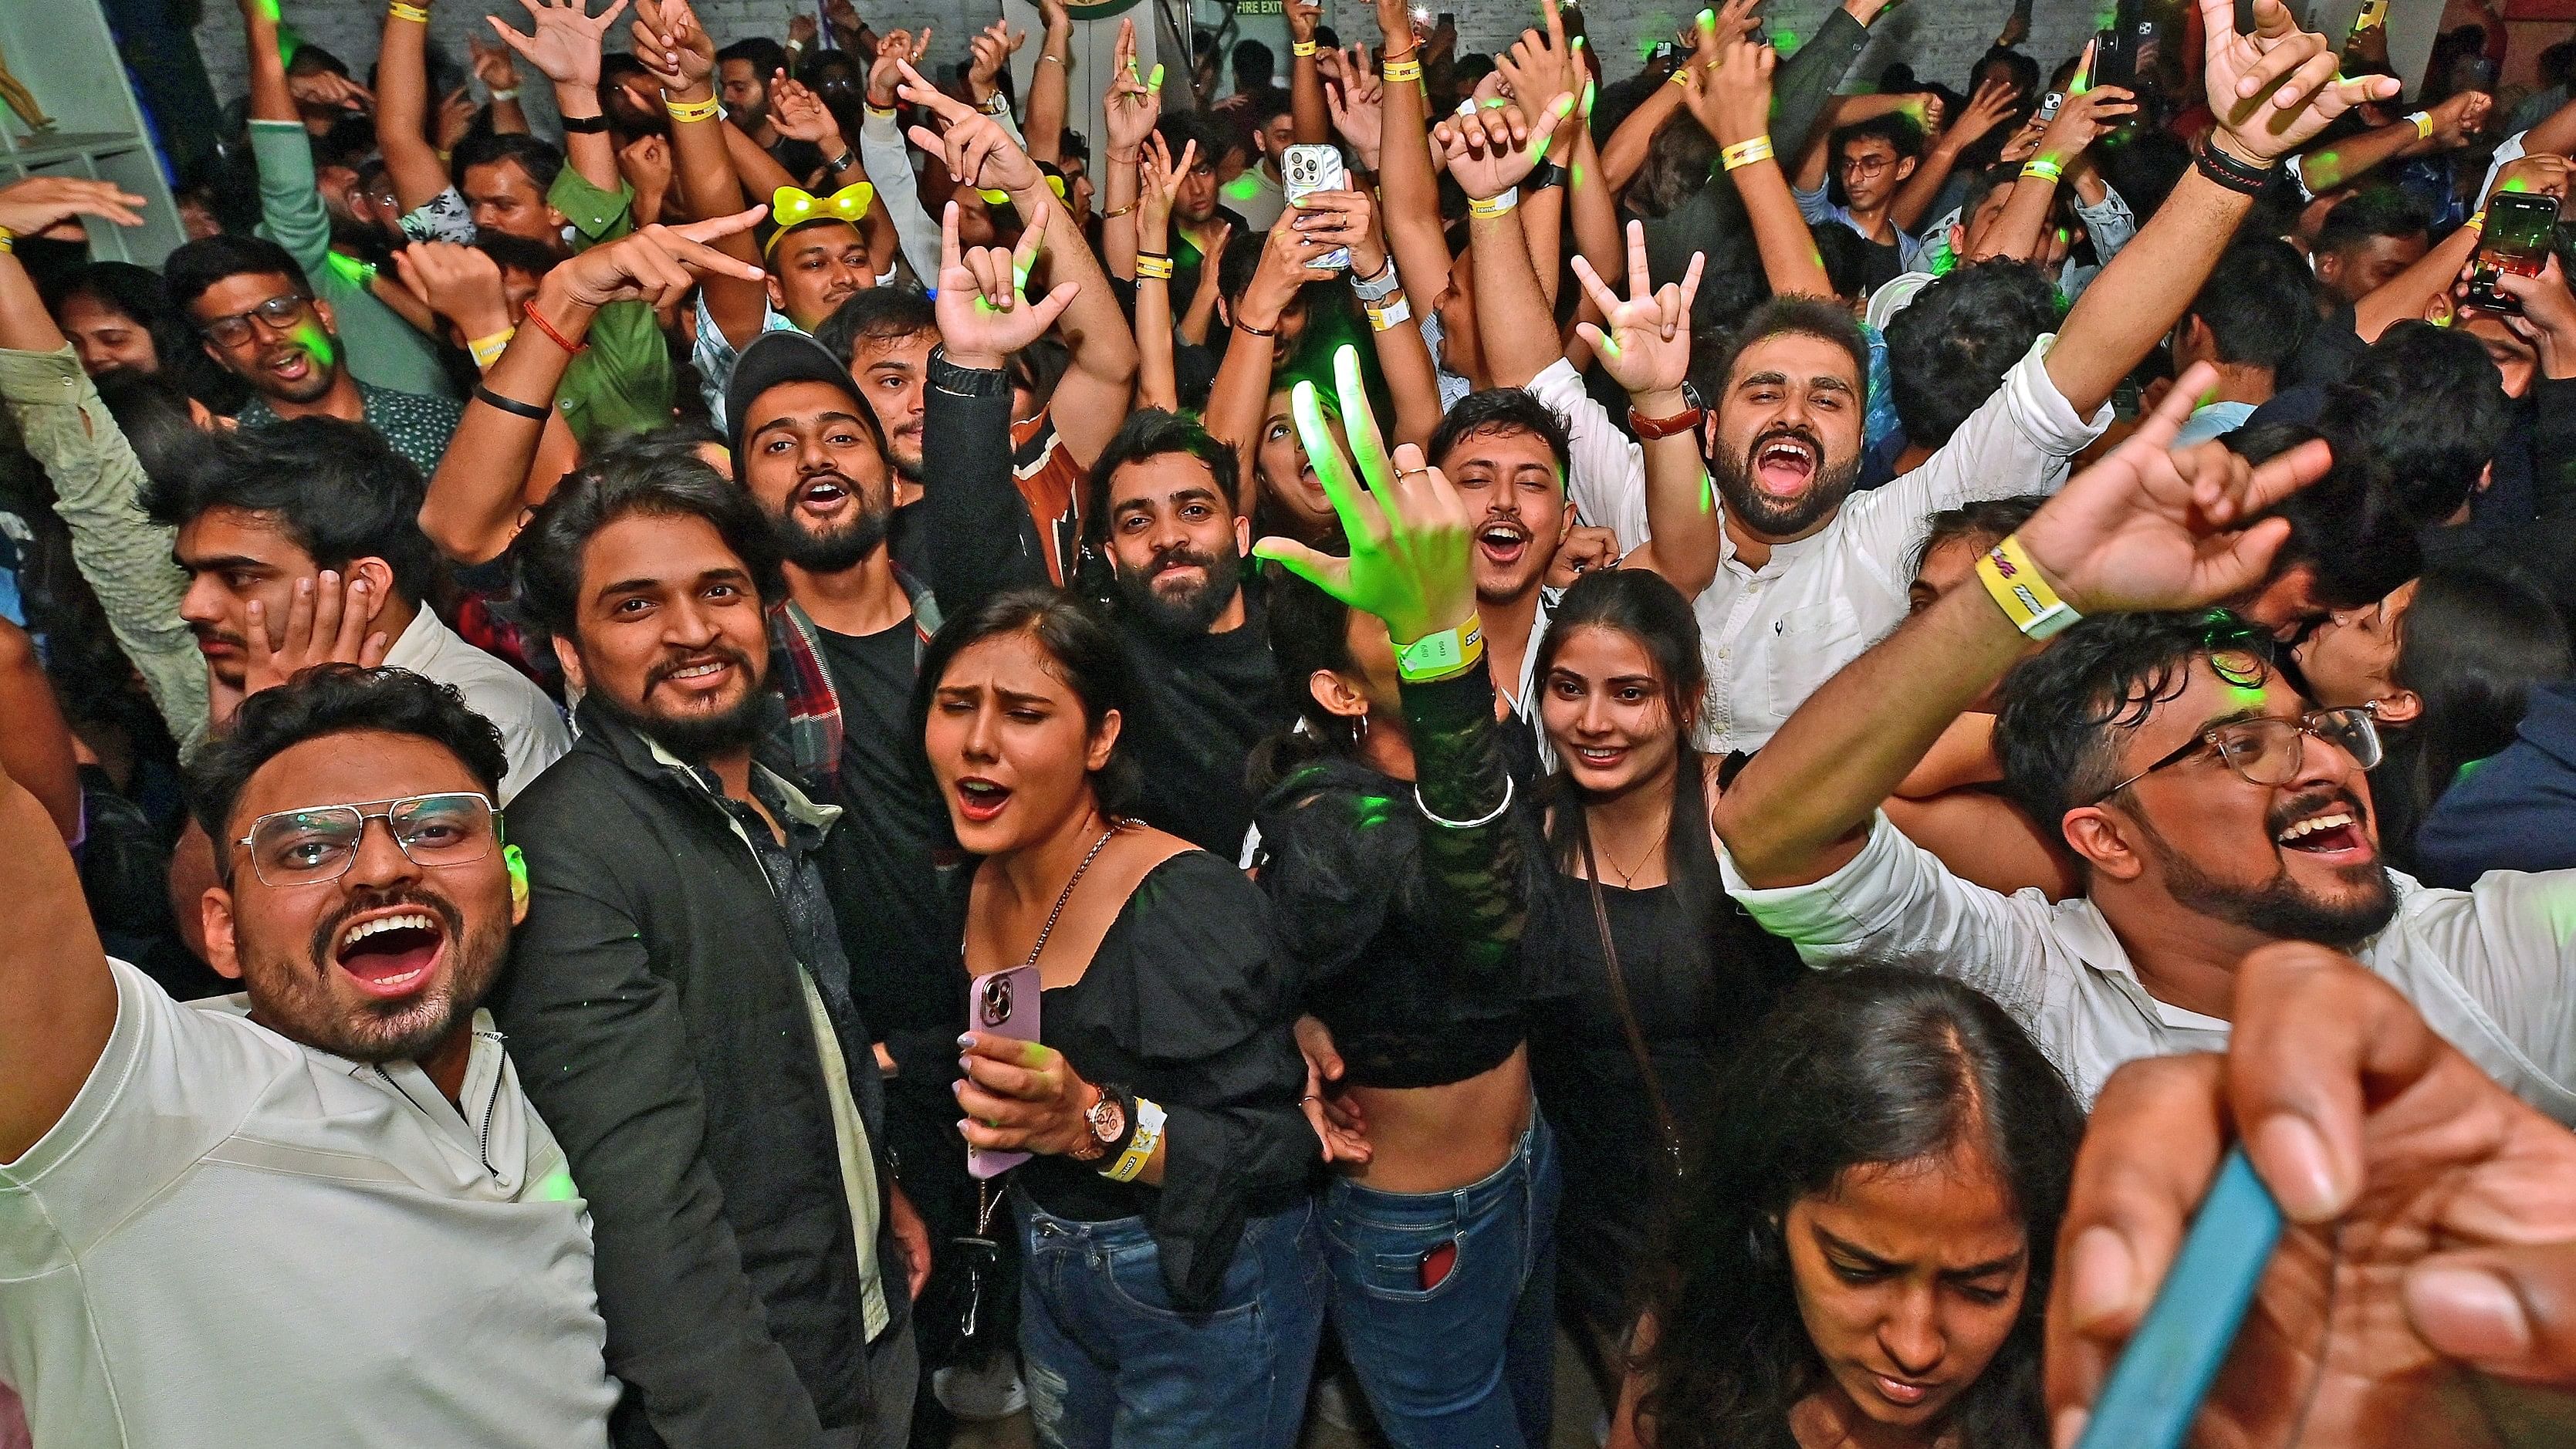 <div class="paragraphs"><p>The party scene at a pub in Bengaluru's Church Street on New Year's Eve on Sunday. </p></div>